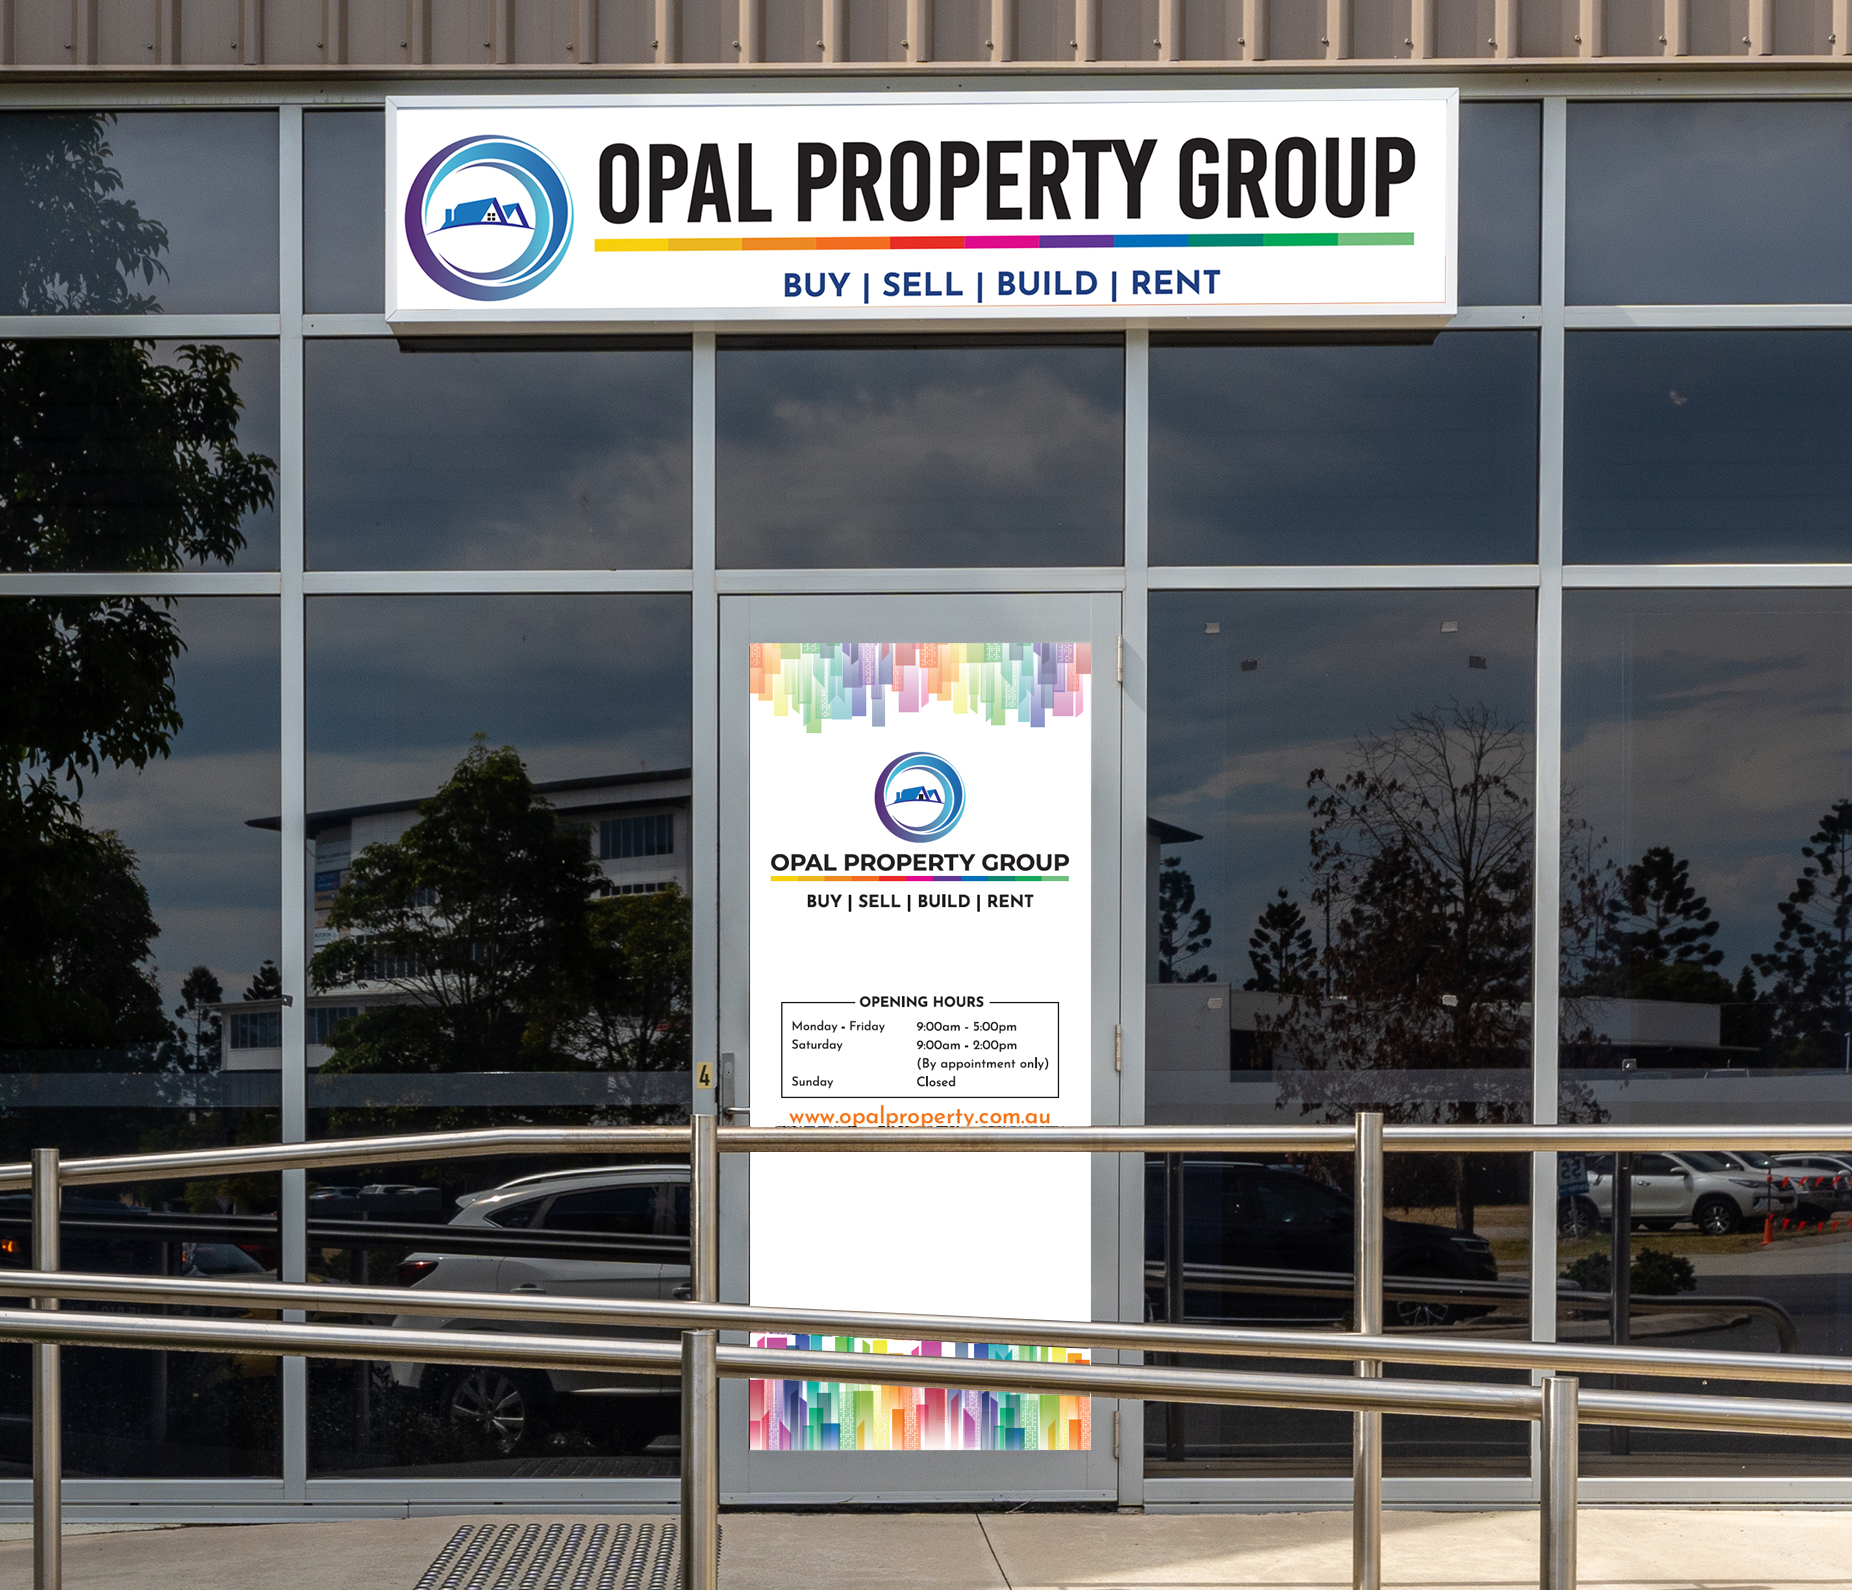 <h5></h5>
<h5 style="text-align: center;"><strong>OPAL PROPERTY GROUP</strong><br />
(Real Estate)</h5>
